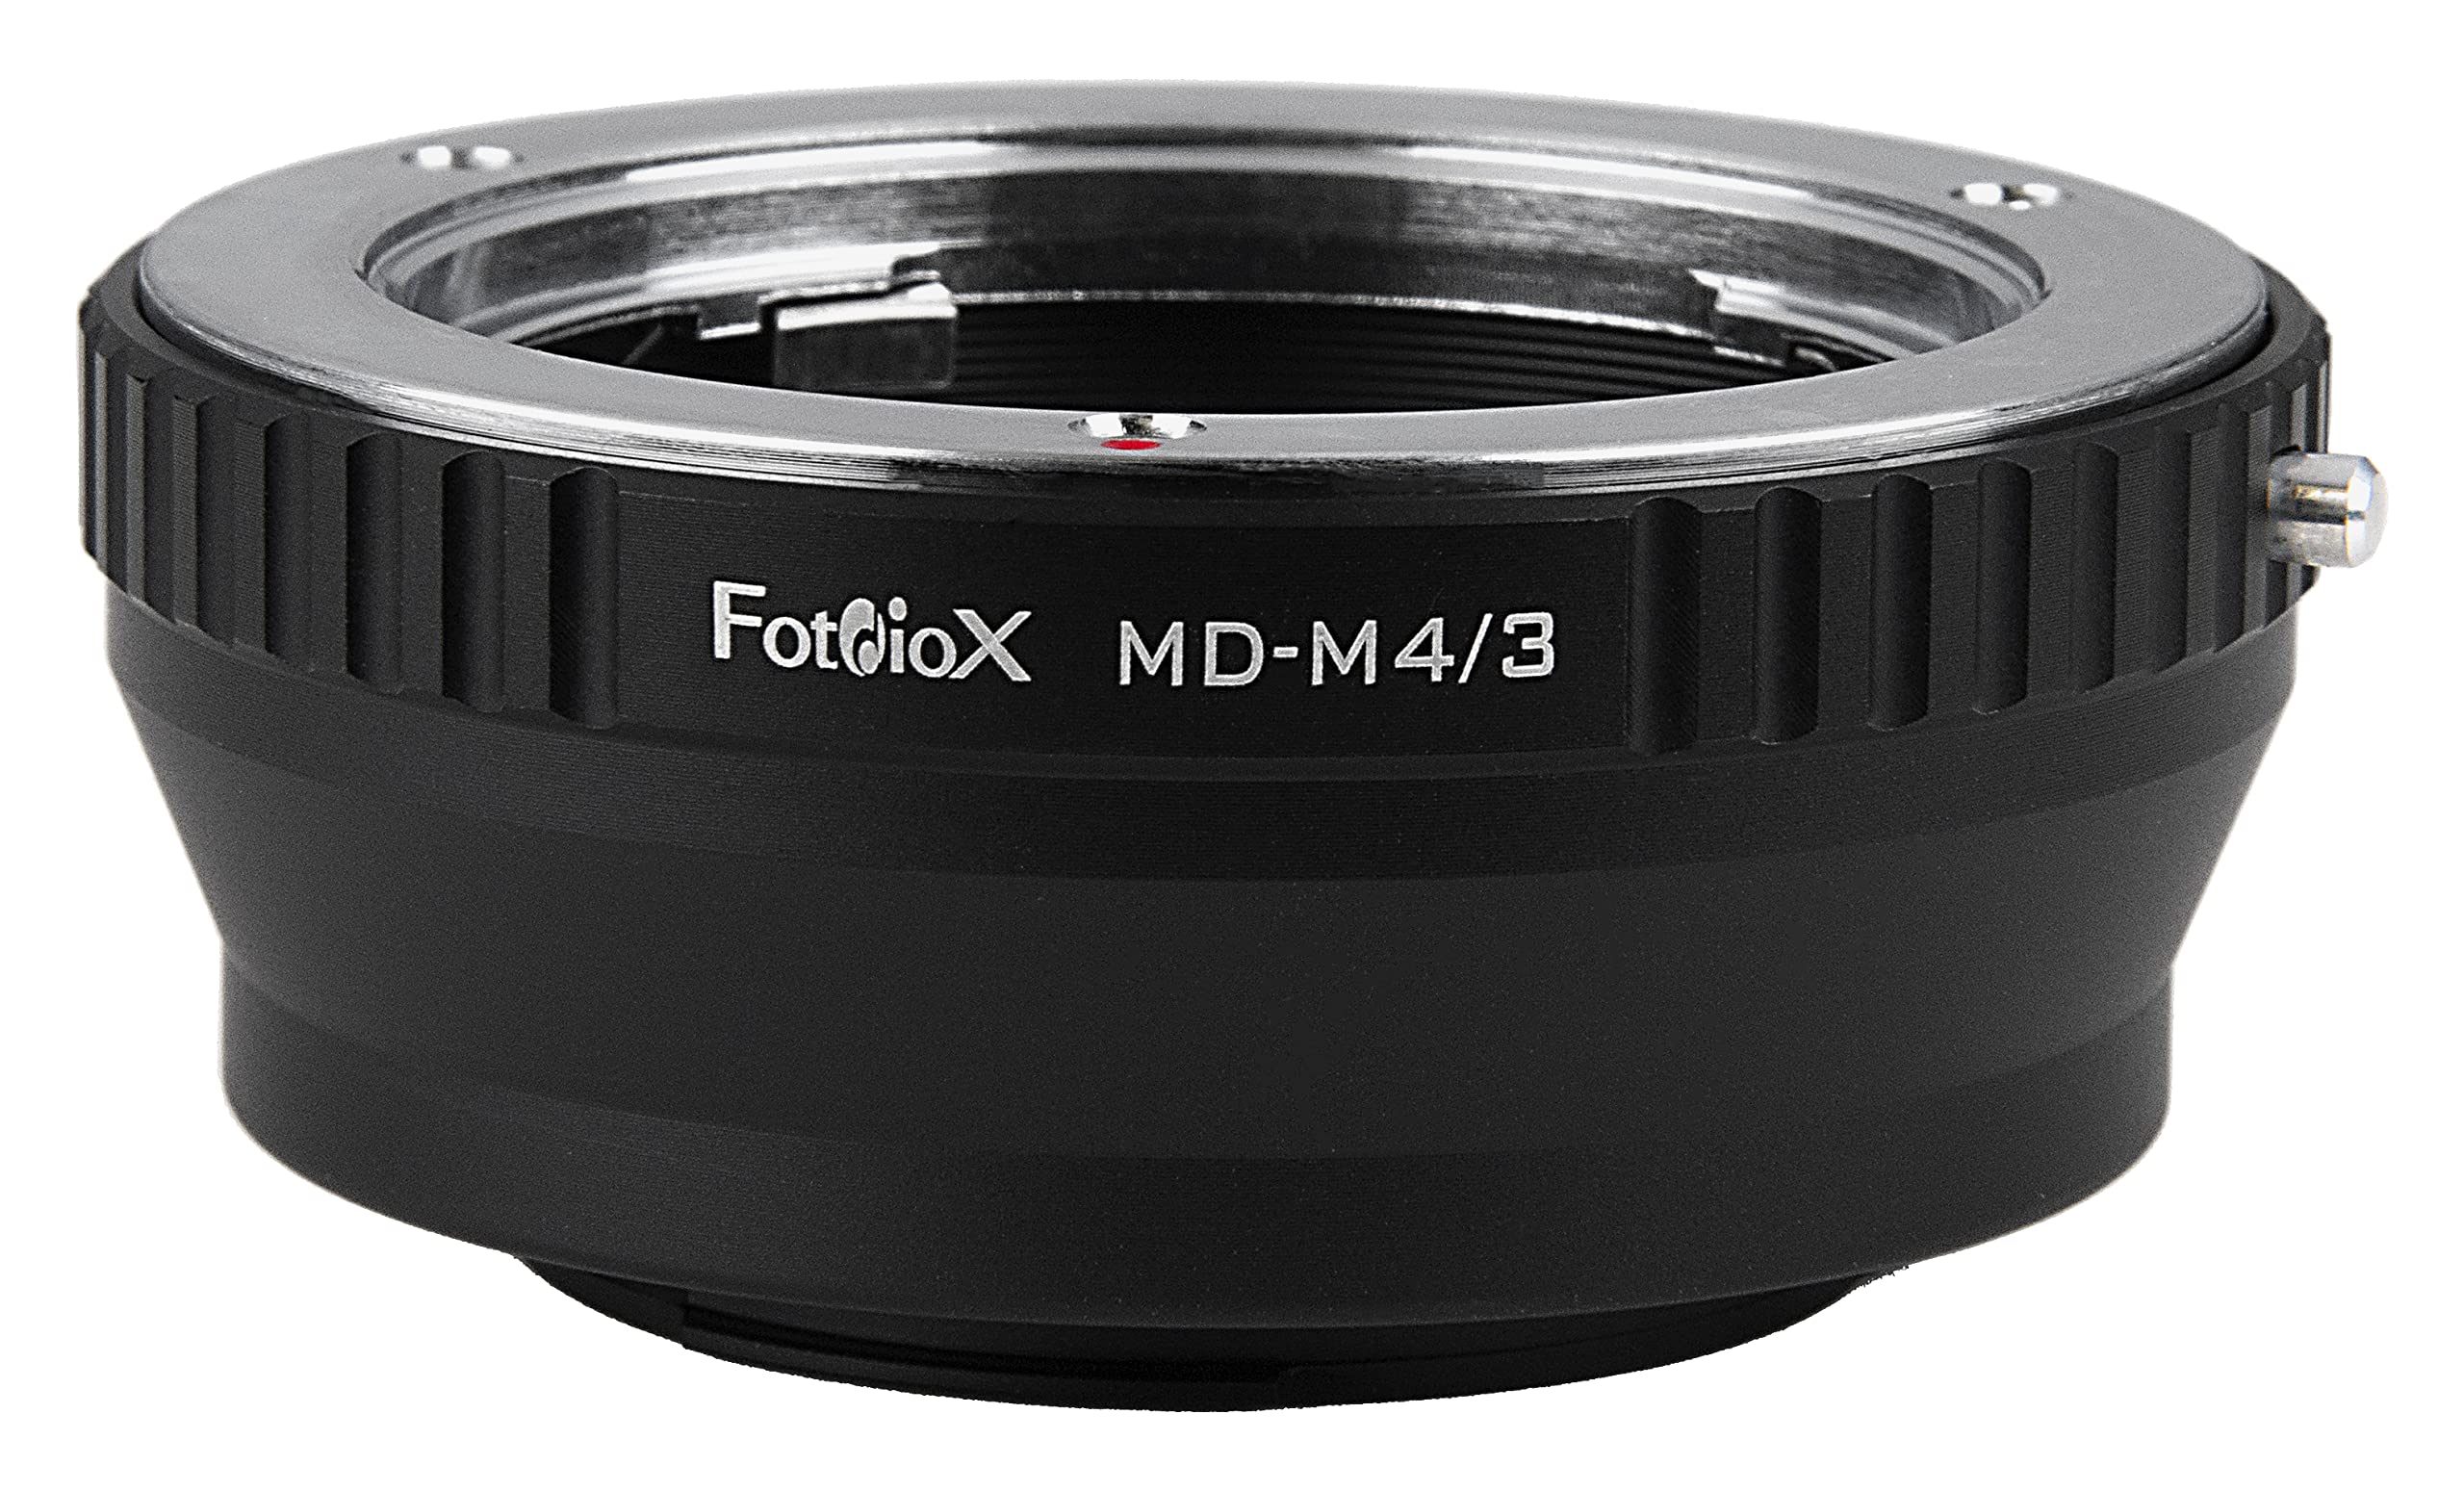 Fotodiox Lens Mount Adapter Compatible with Minolta MD Lenses on Micro Four Thirds Mount Cameras